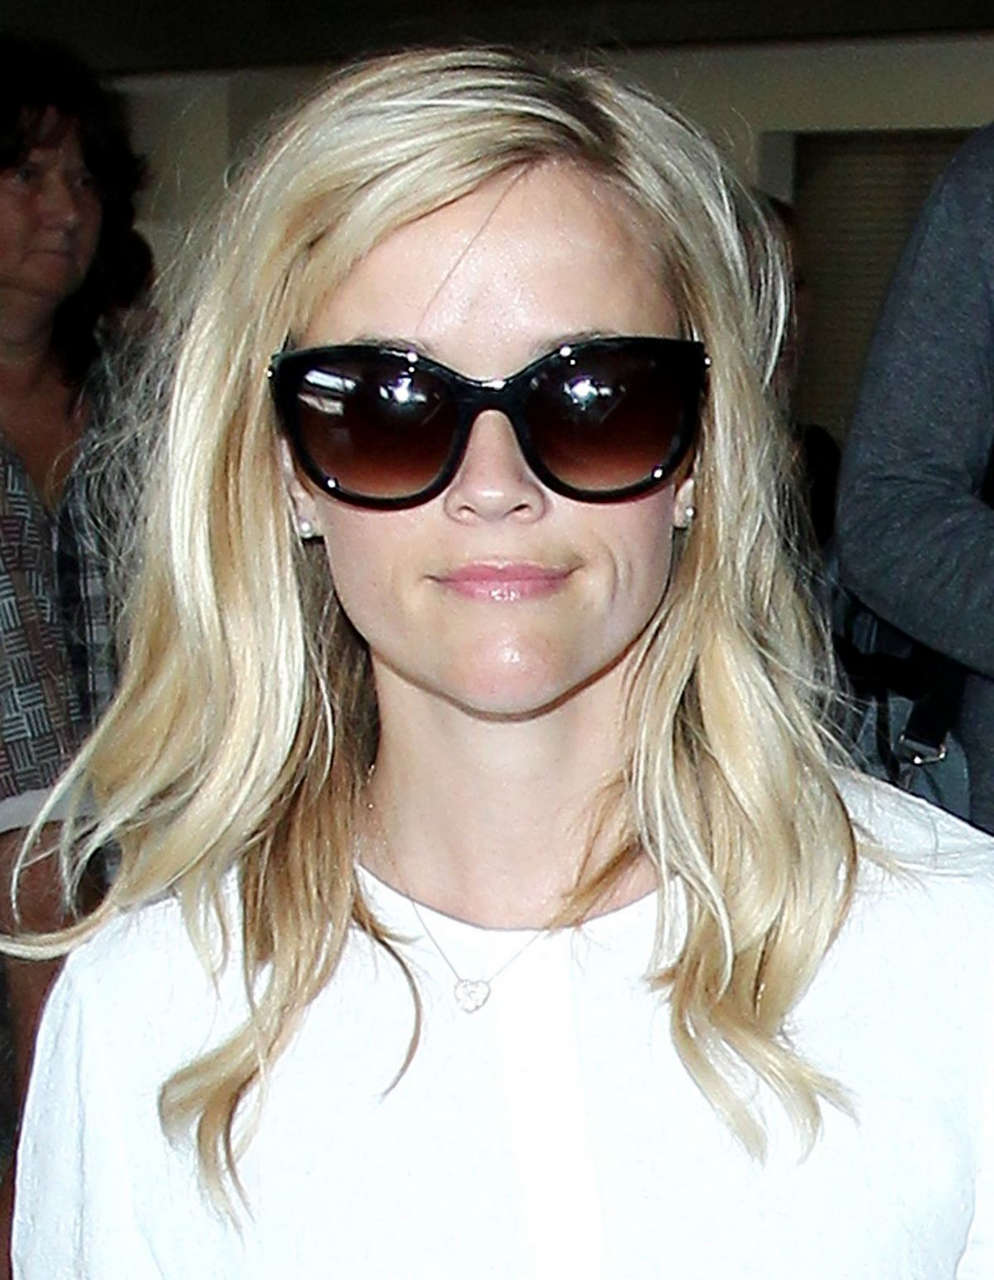 Reese Witherspoon Los Angeles International Airport